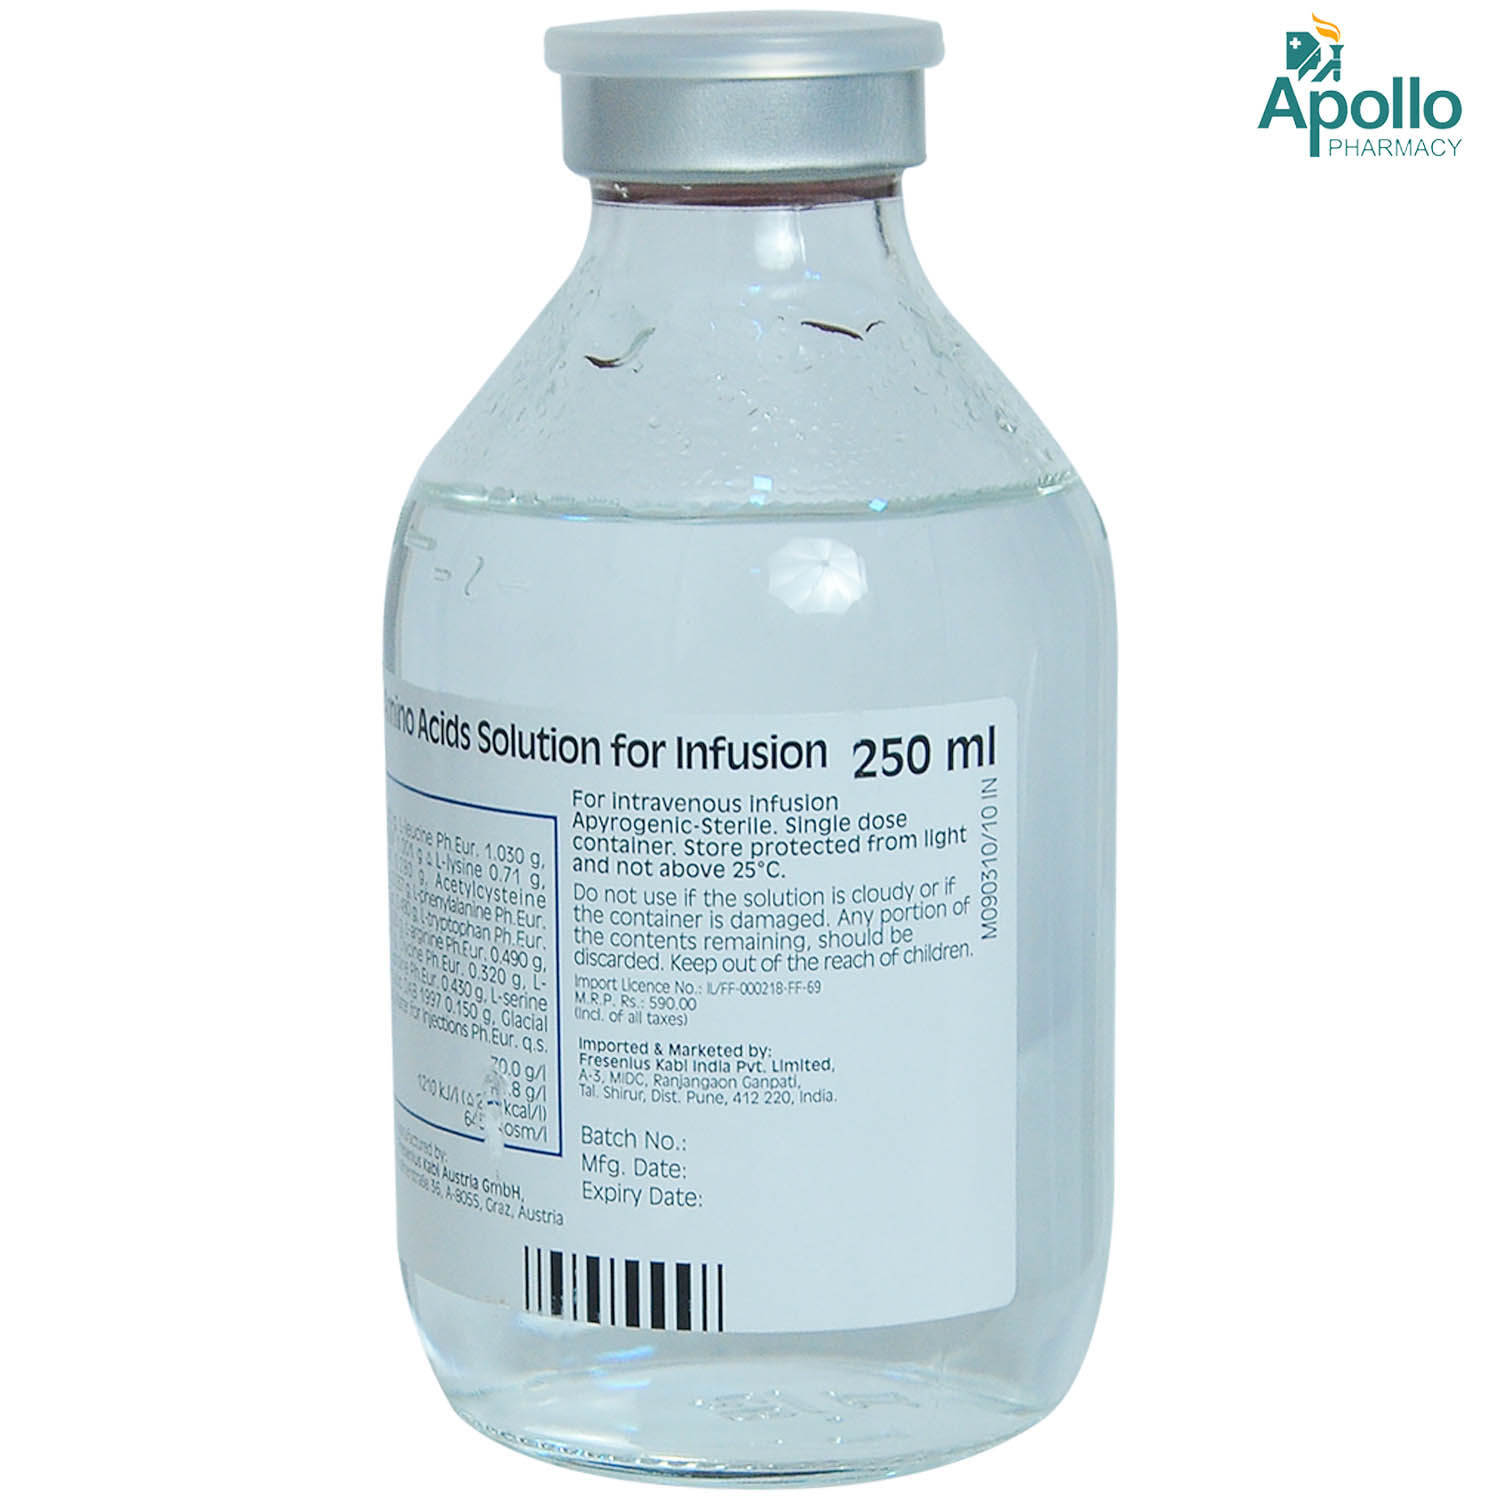 Nephrosterile Infusion 250 ml, Pack of 1 